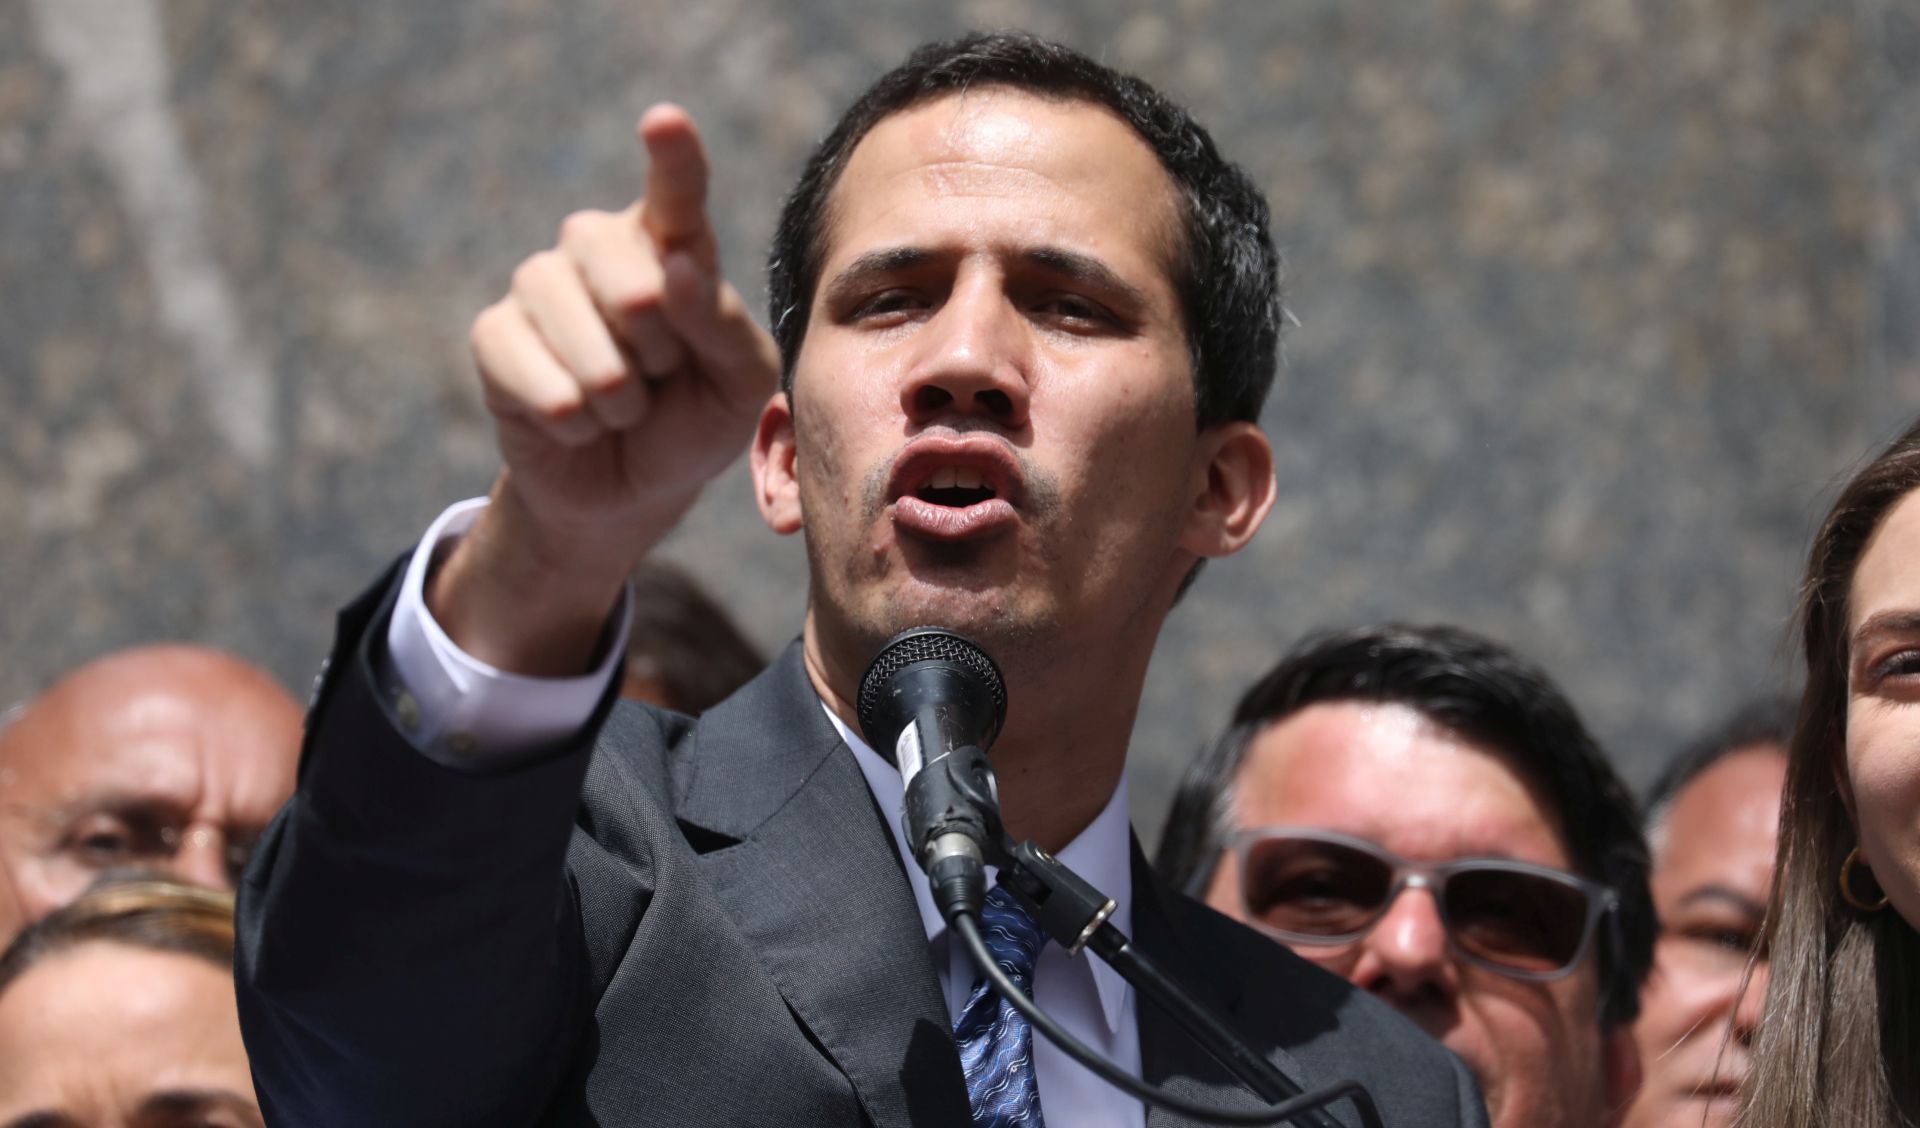 epa07319409 Head of the Venezuelan Parliament, Juan Guaido (C) speaks at a public event in the east of Caracas, Venezuela, 25 January 2019. Guaido, who two days ago announced that he assumed executive powers as interim president, asked on Friday for a minute of silence for the victims of 'the brutal repression'.  EPA/Miguel Gutiérrez